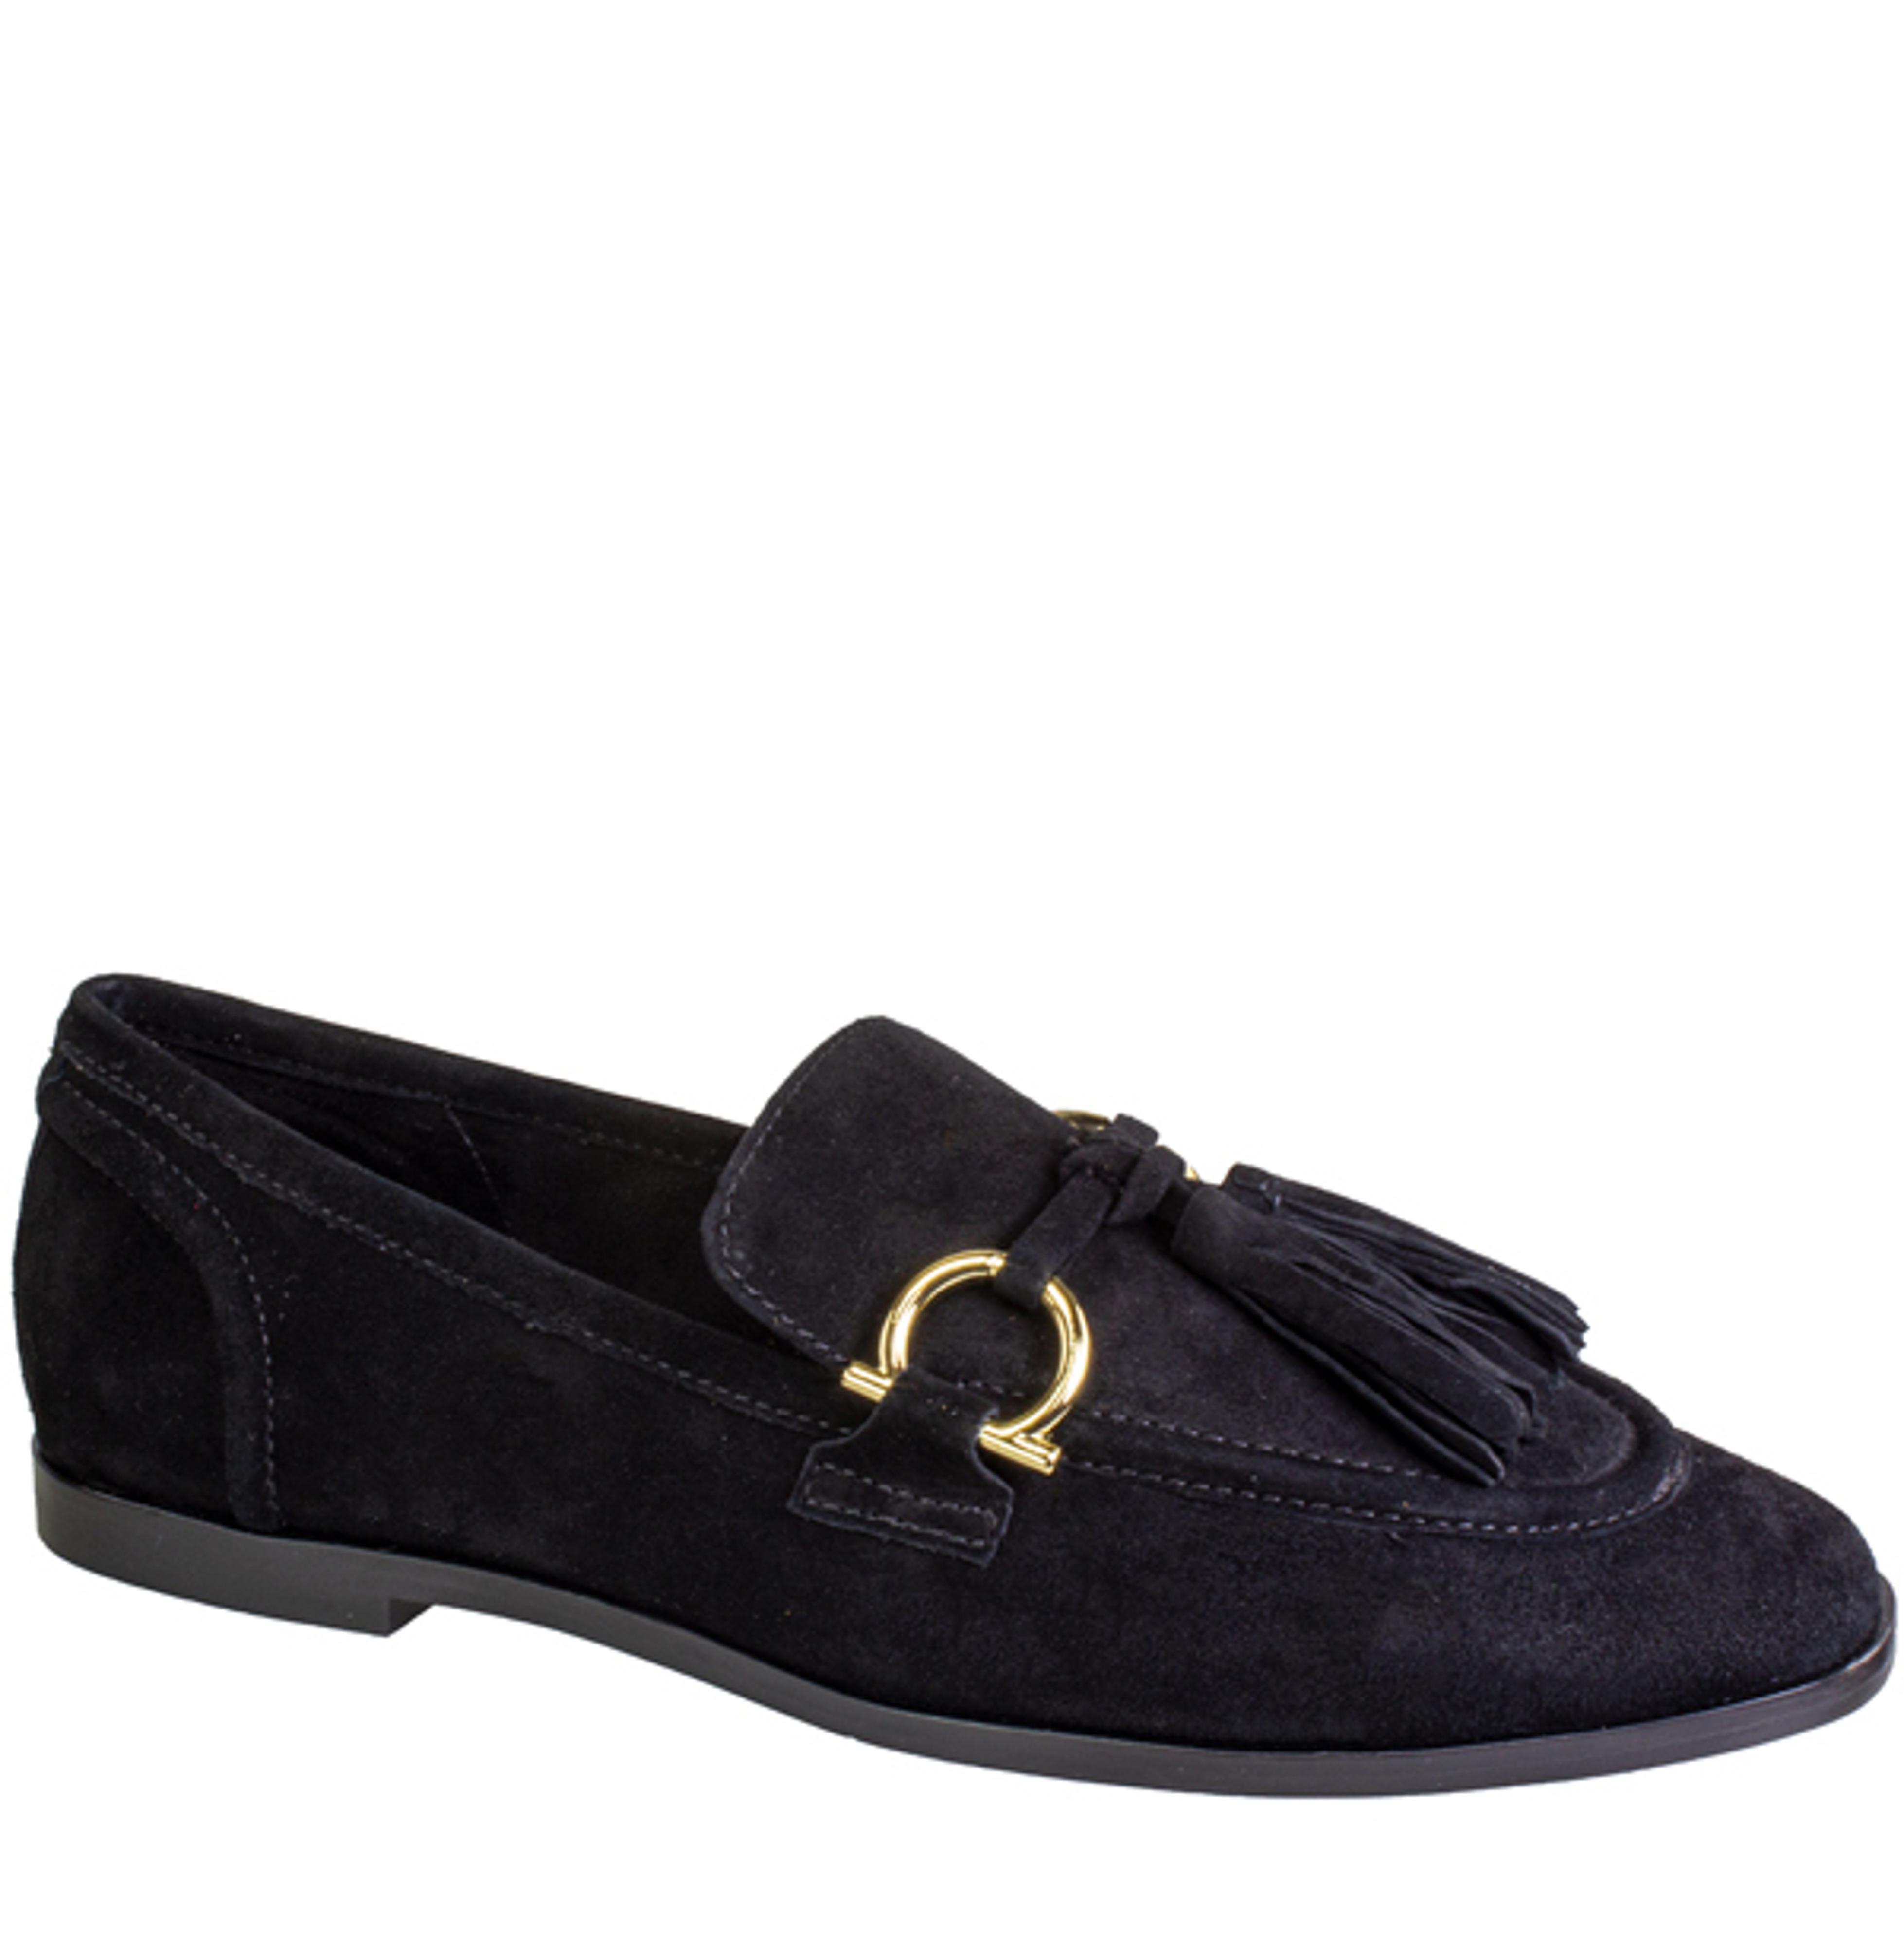 VELVIT BLACK SUEDE | Tops For Shoes